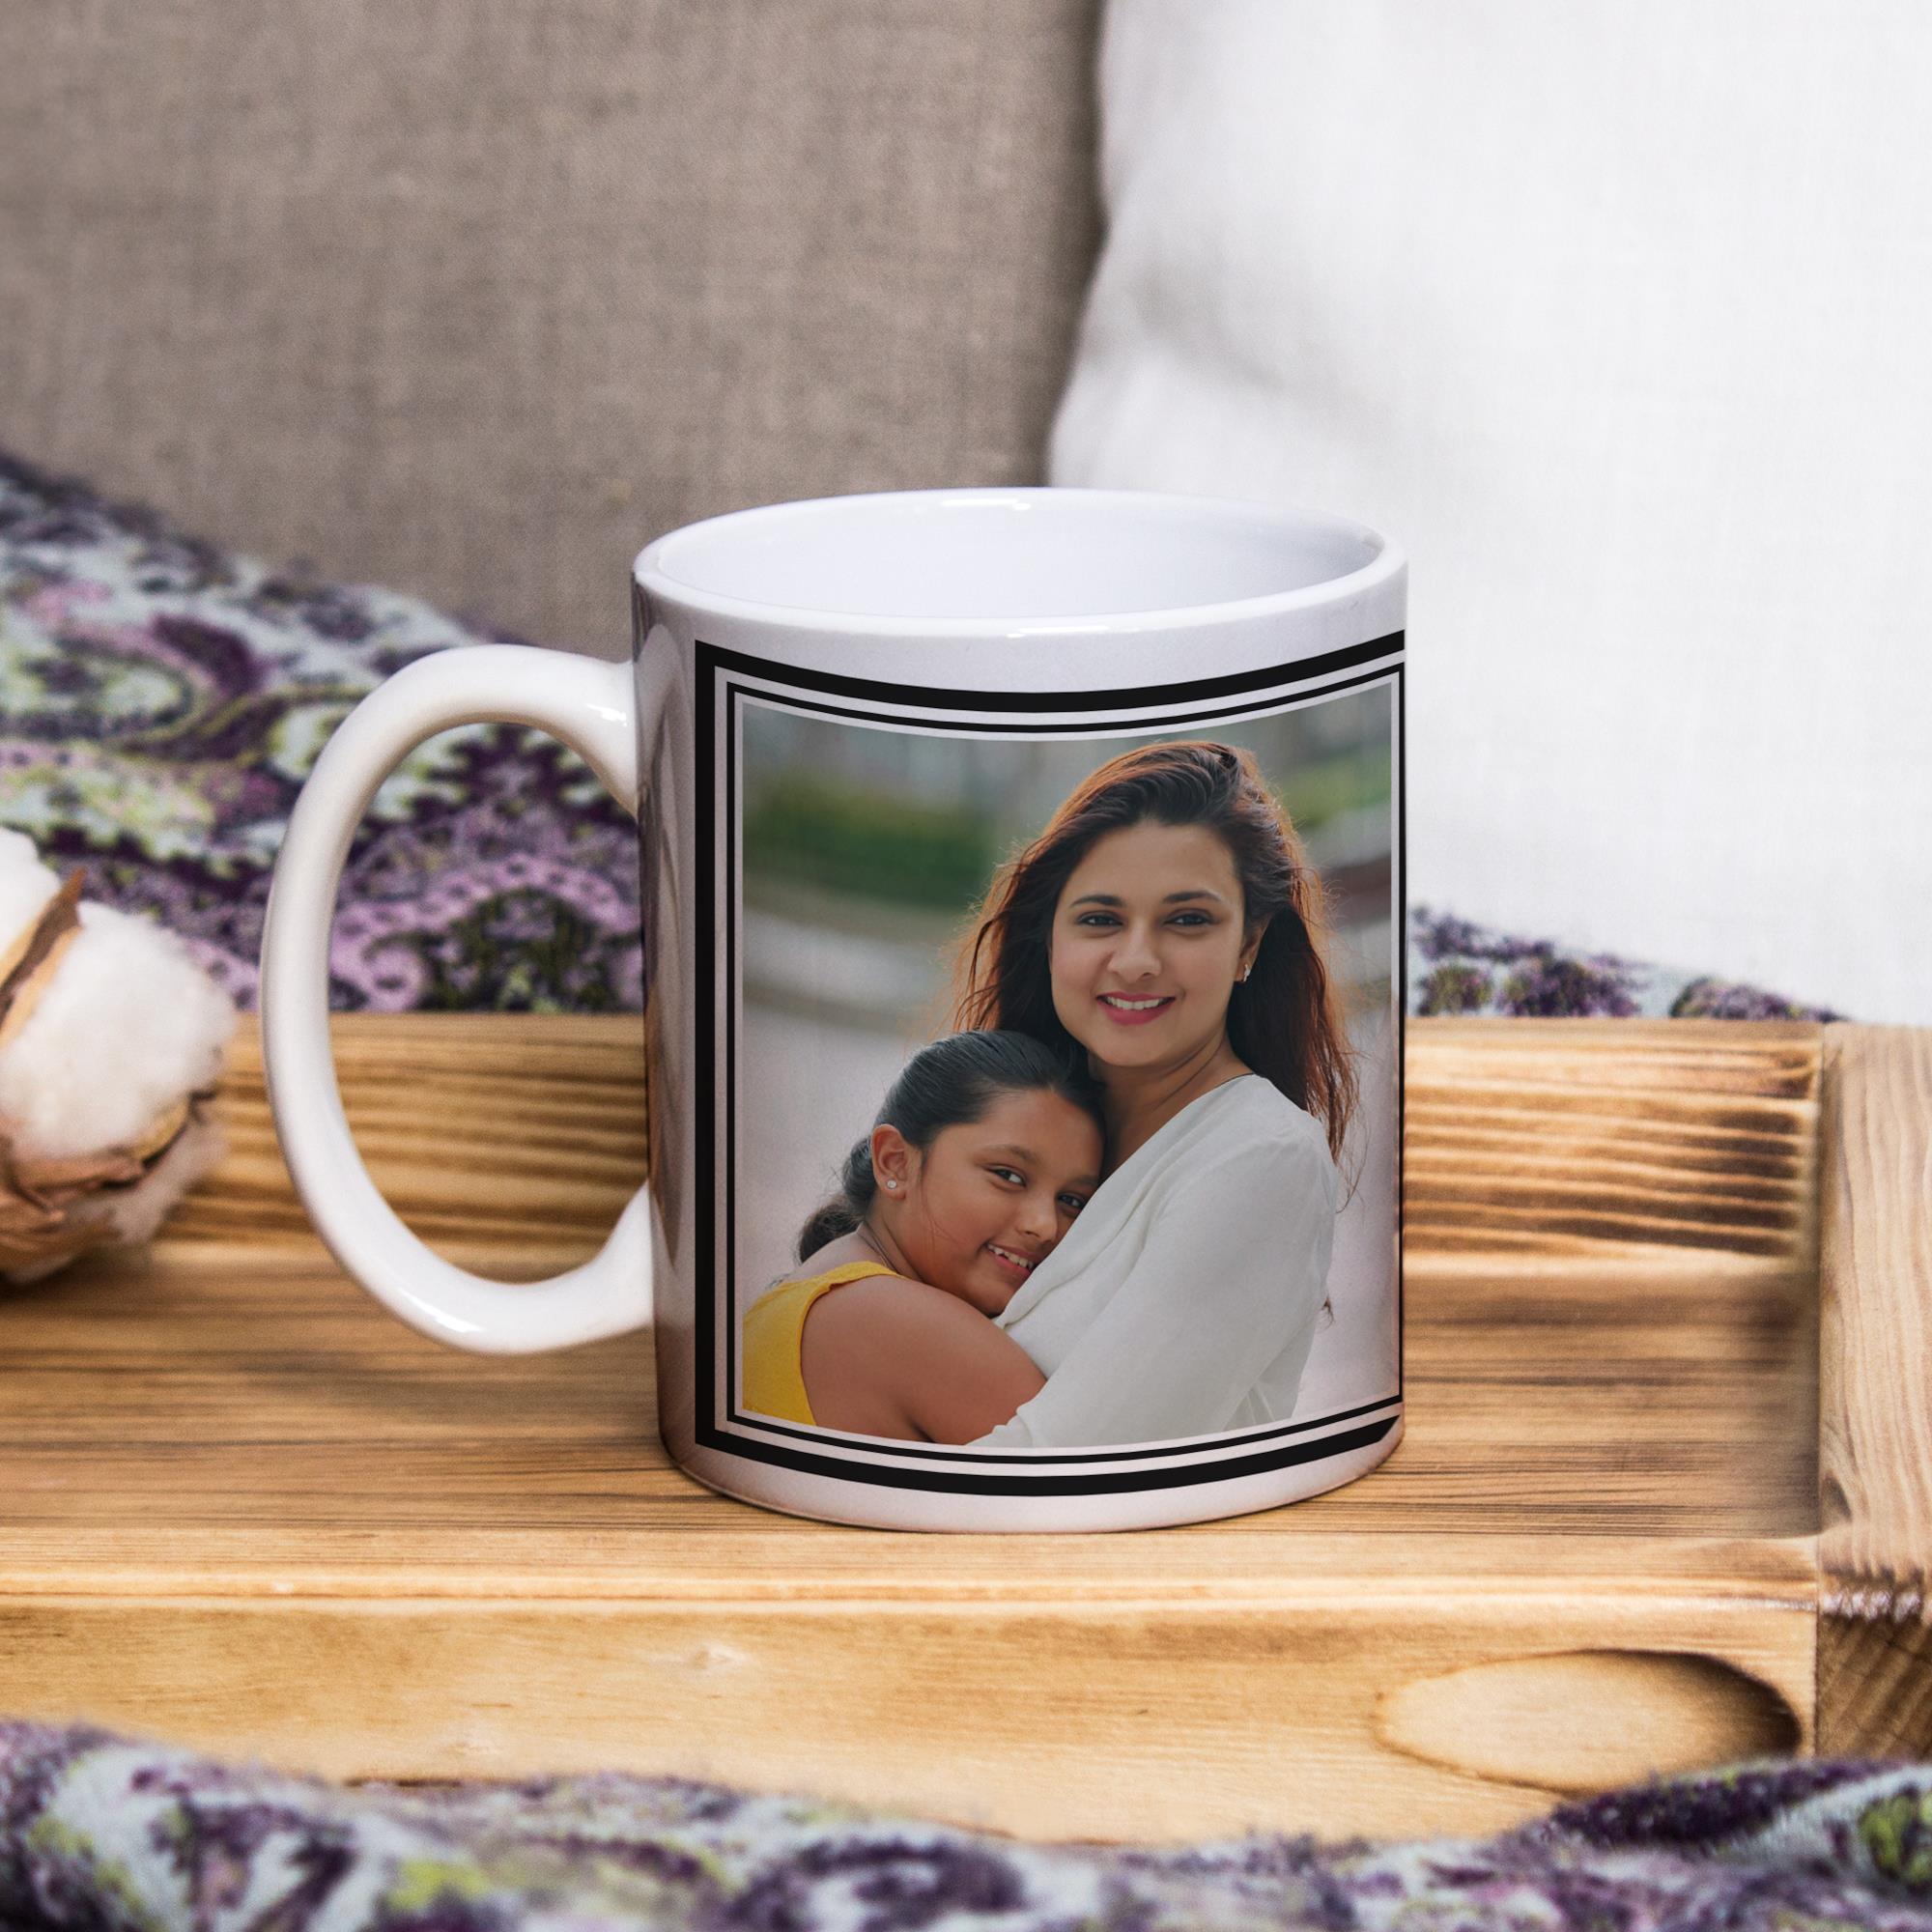 25 Personalized Mothers Day Gifts Your Mom Will Adore